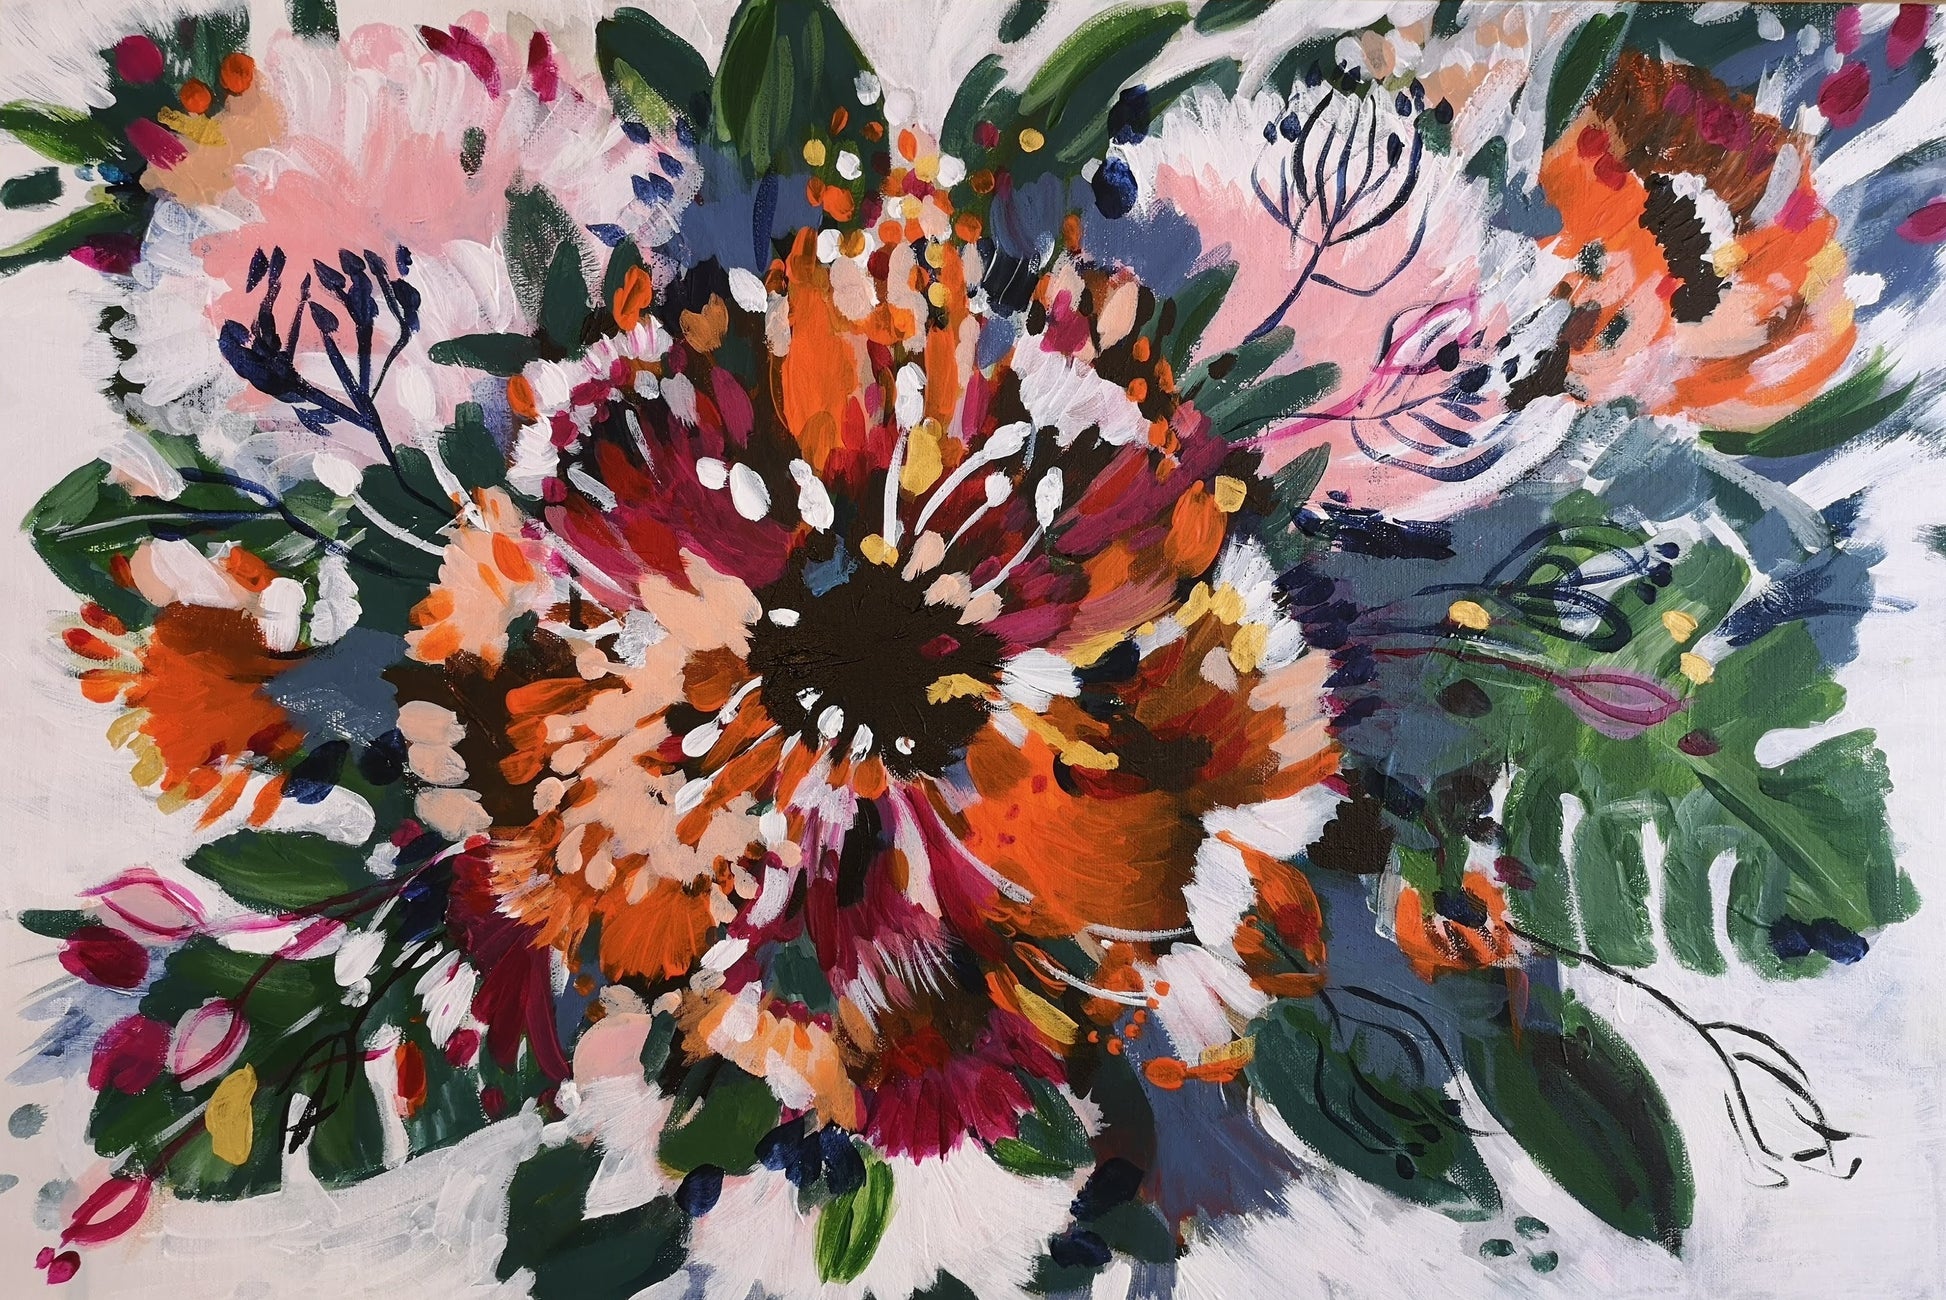 Abstract original acrylic painting by Judy Century art. 'Tropical garden' features cheese plants, bright orange, magenta and gold flowers and floral inspired shapes.